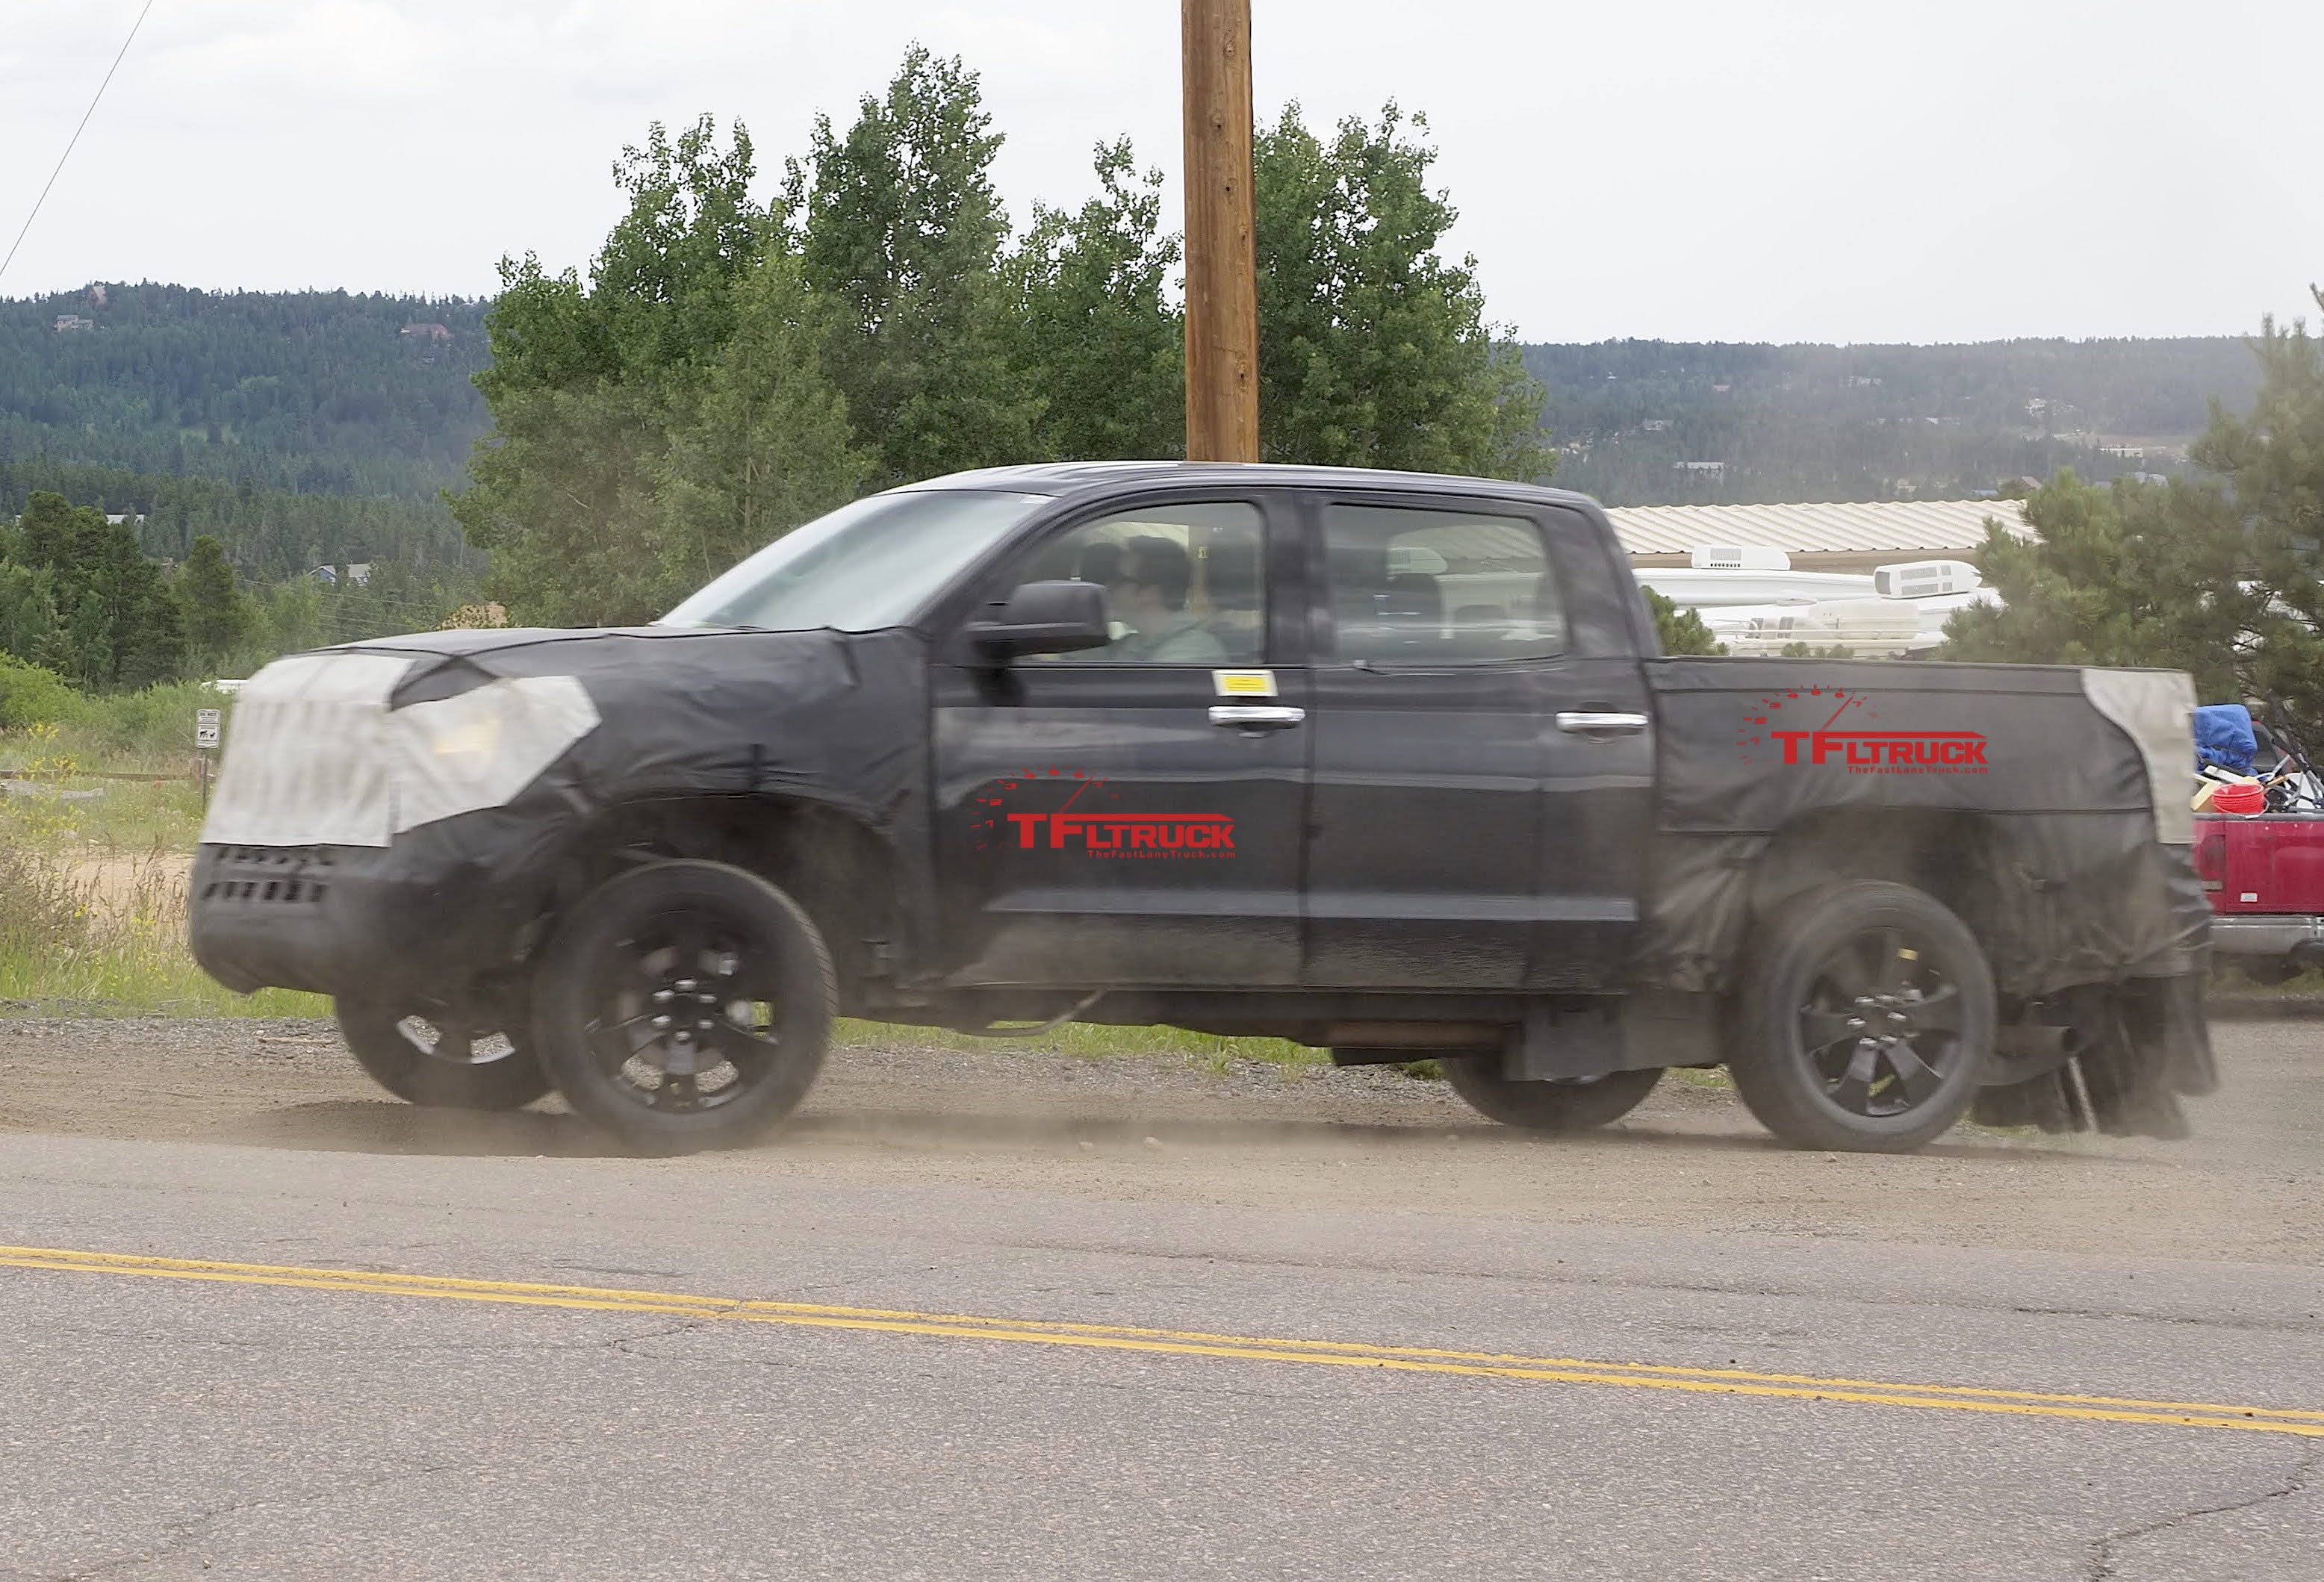 2021 Toyota Tundra Prototypes With Big Grilles And Sport Wheels